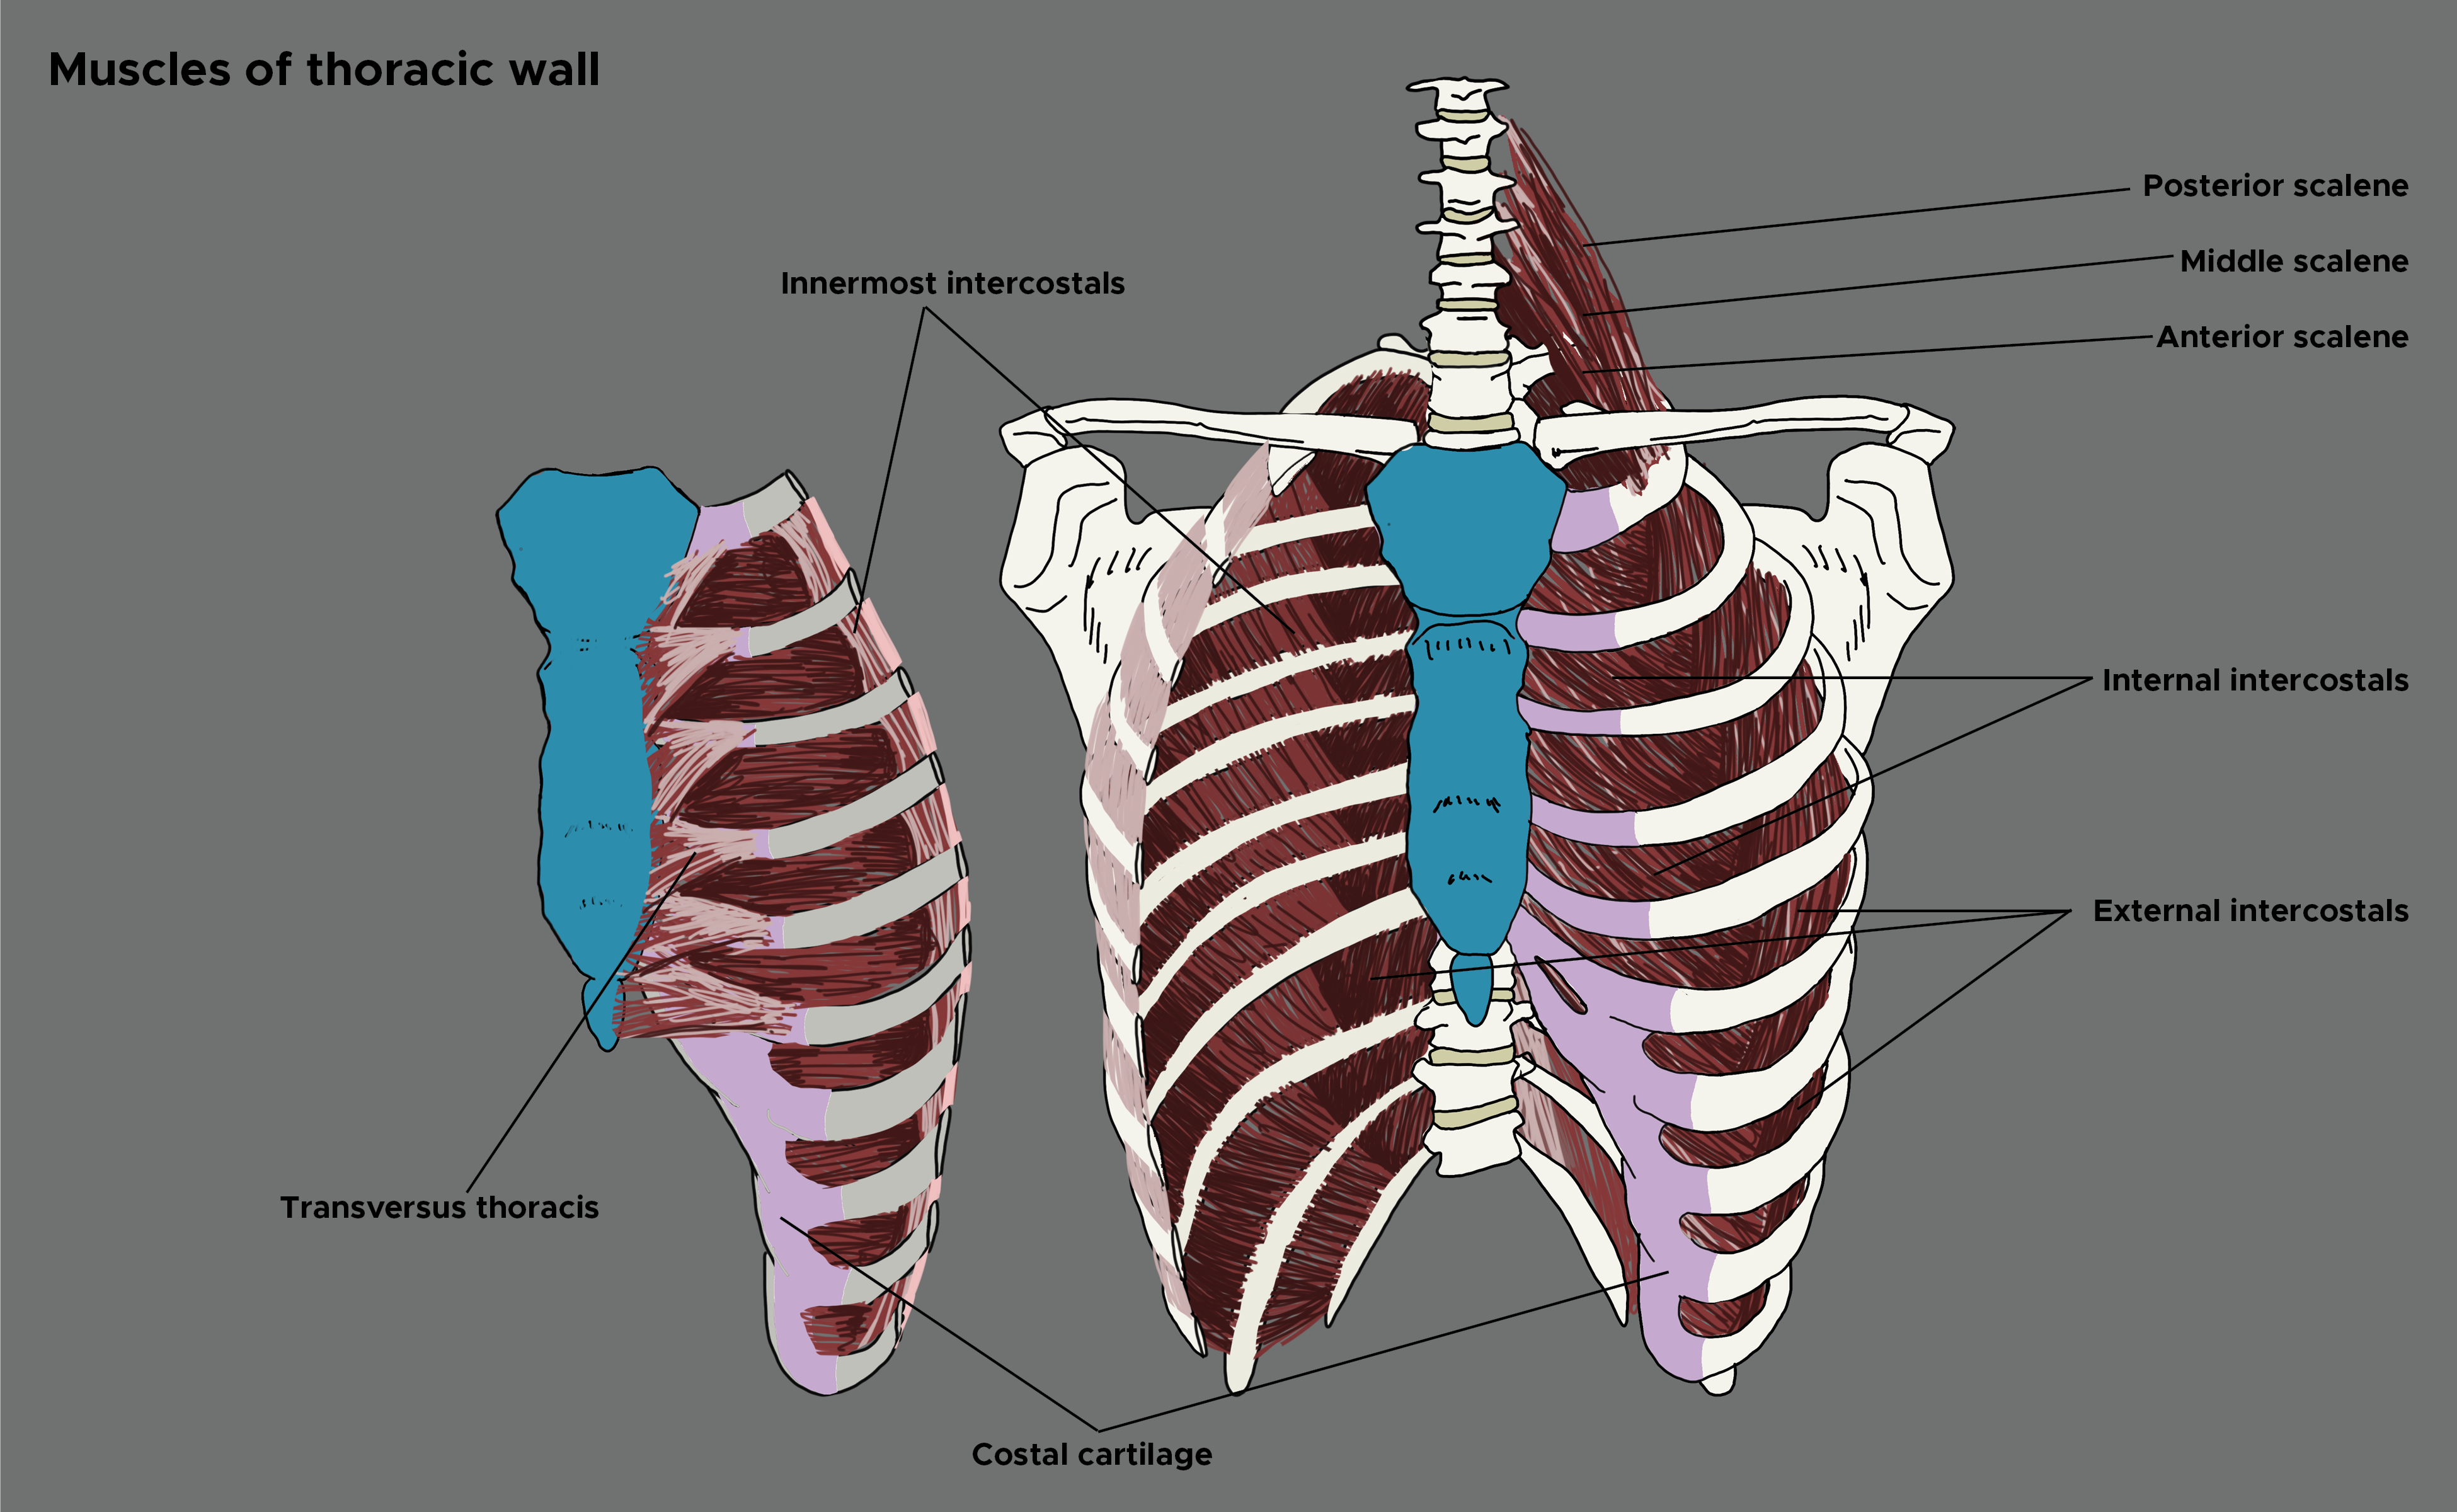 Illustration of the muscles ,of thoracic wall. Intercostals, scalene muscles, sternum, costal cartilage.